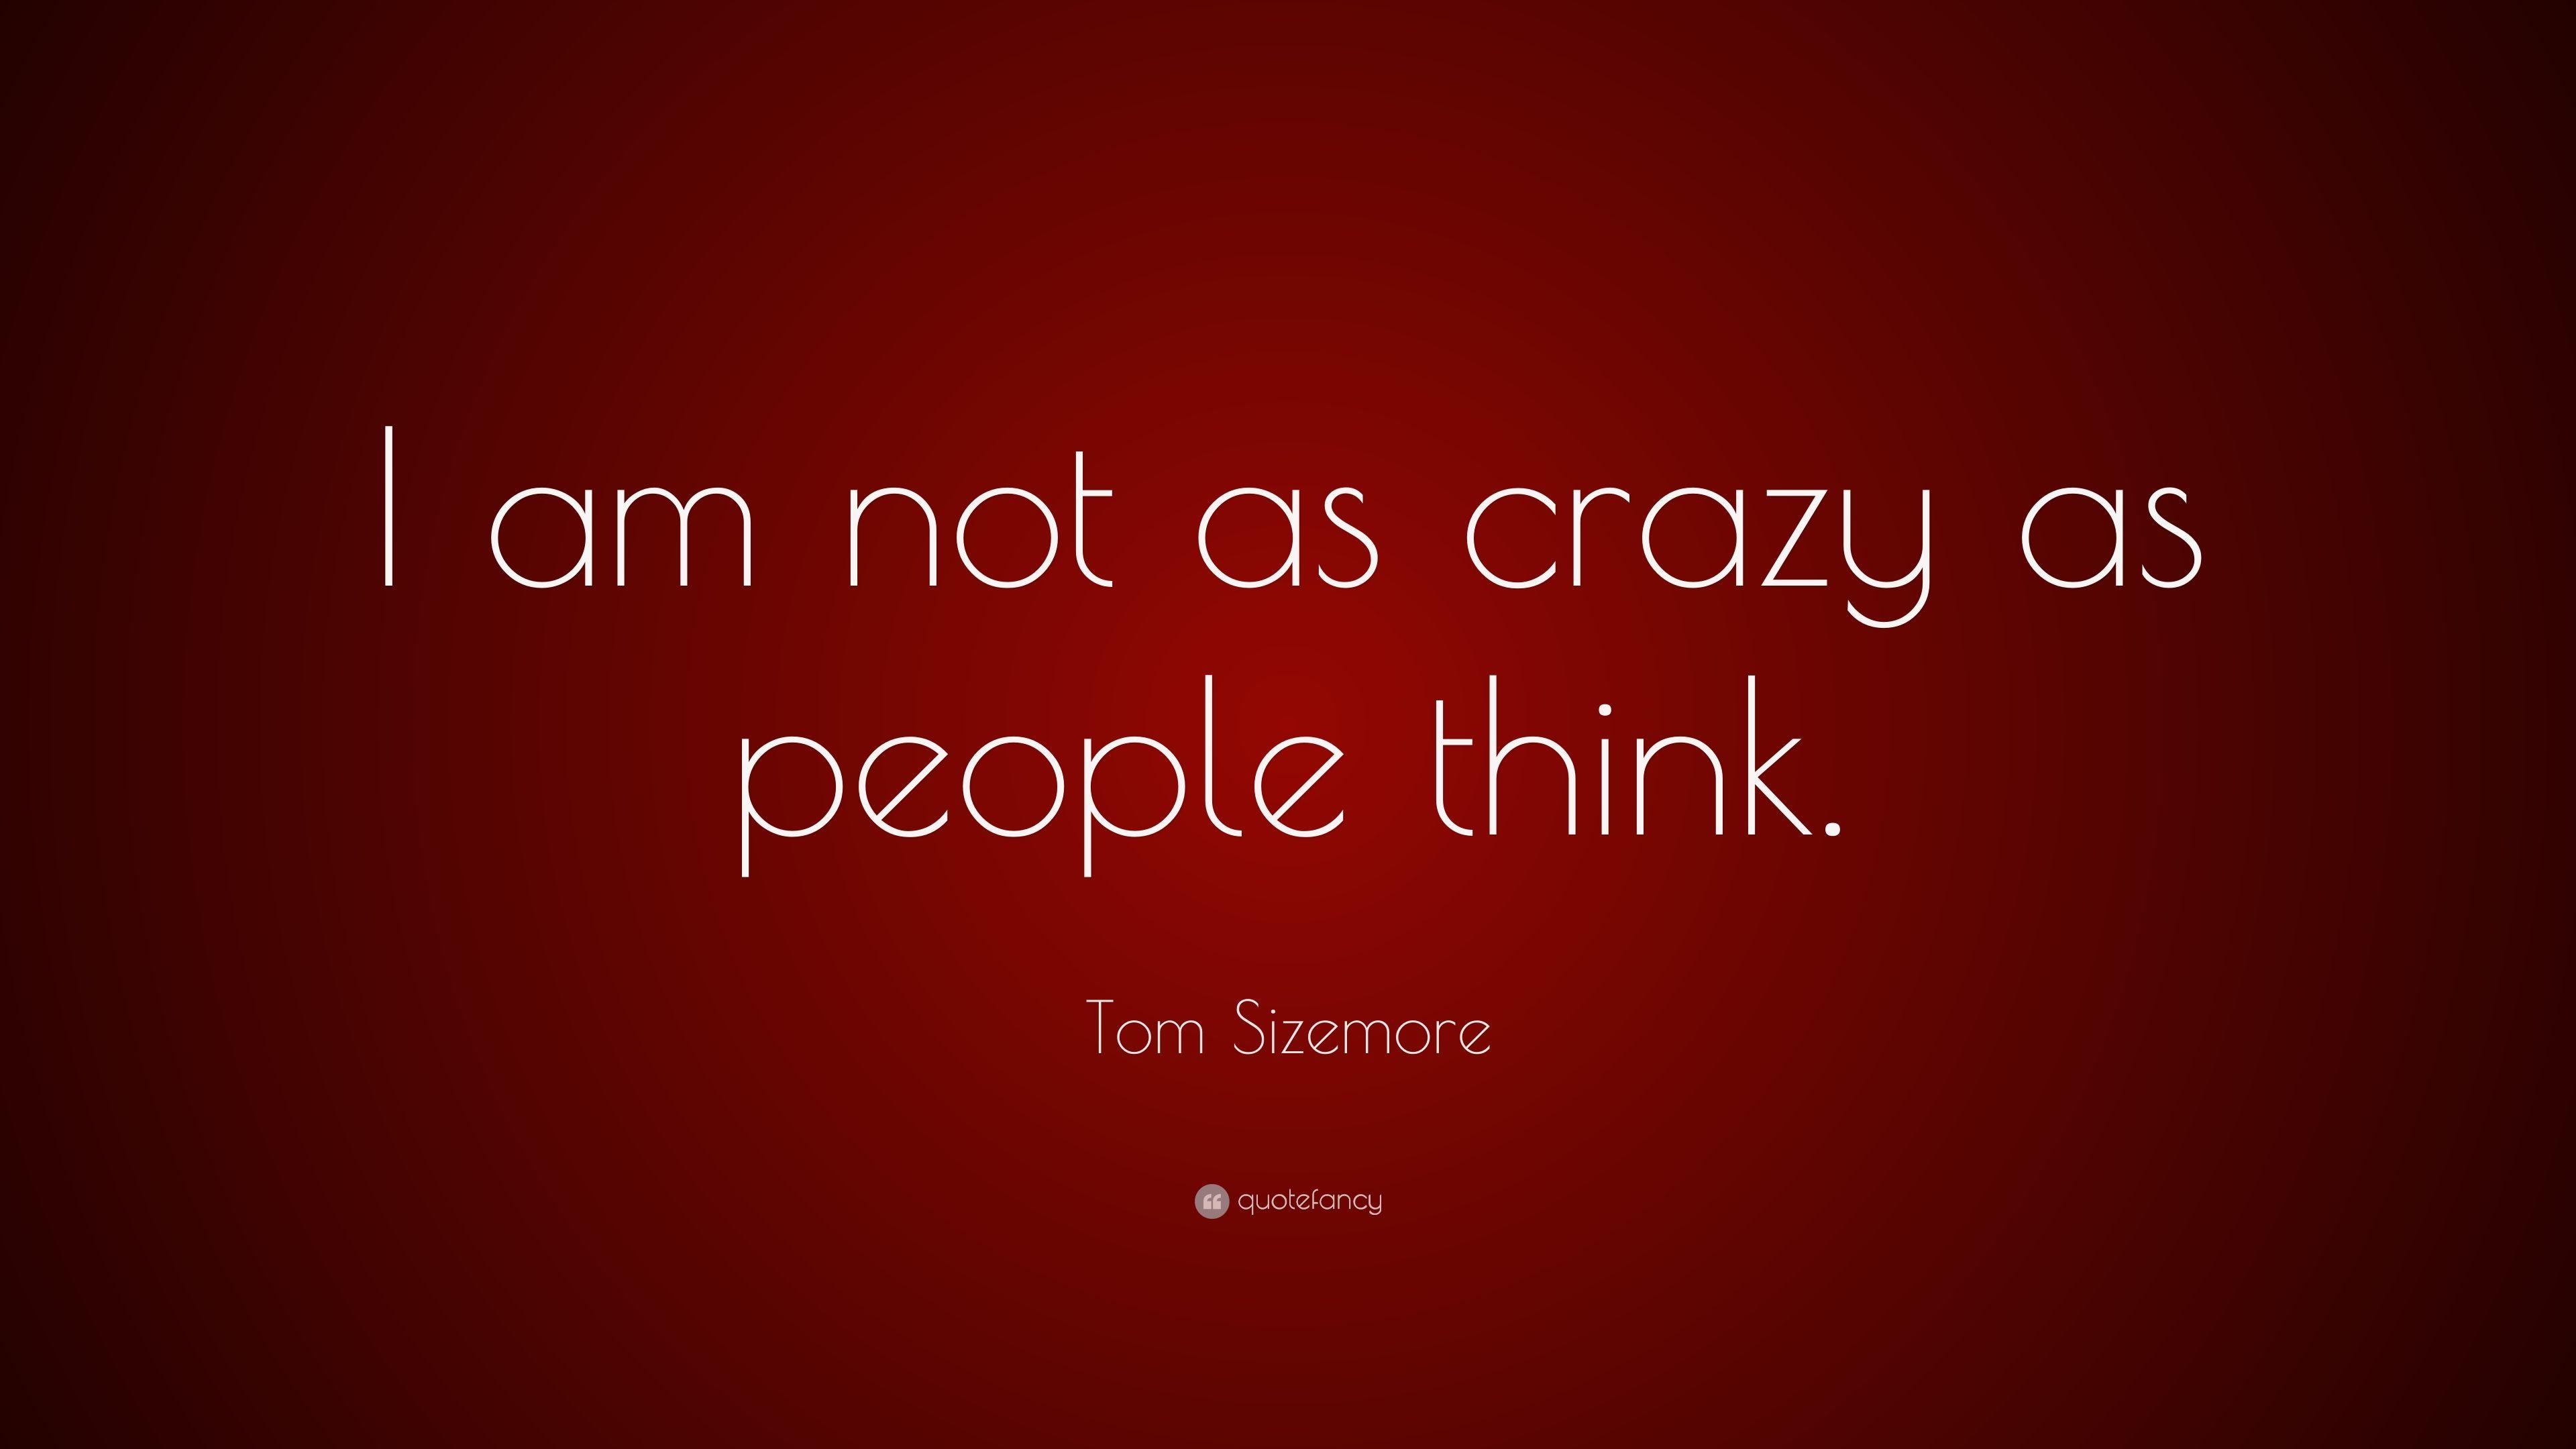 Tom Sizemore Quote: “I am not as crazy as people think.” 5